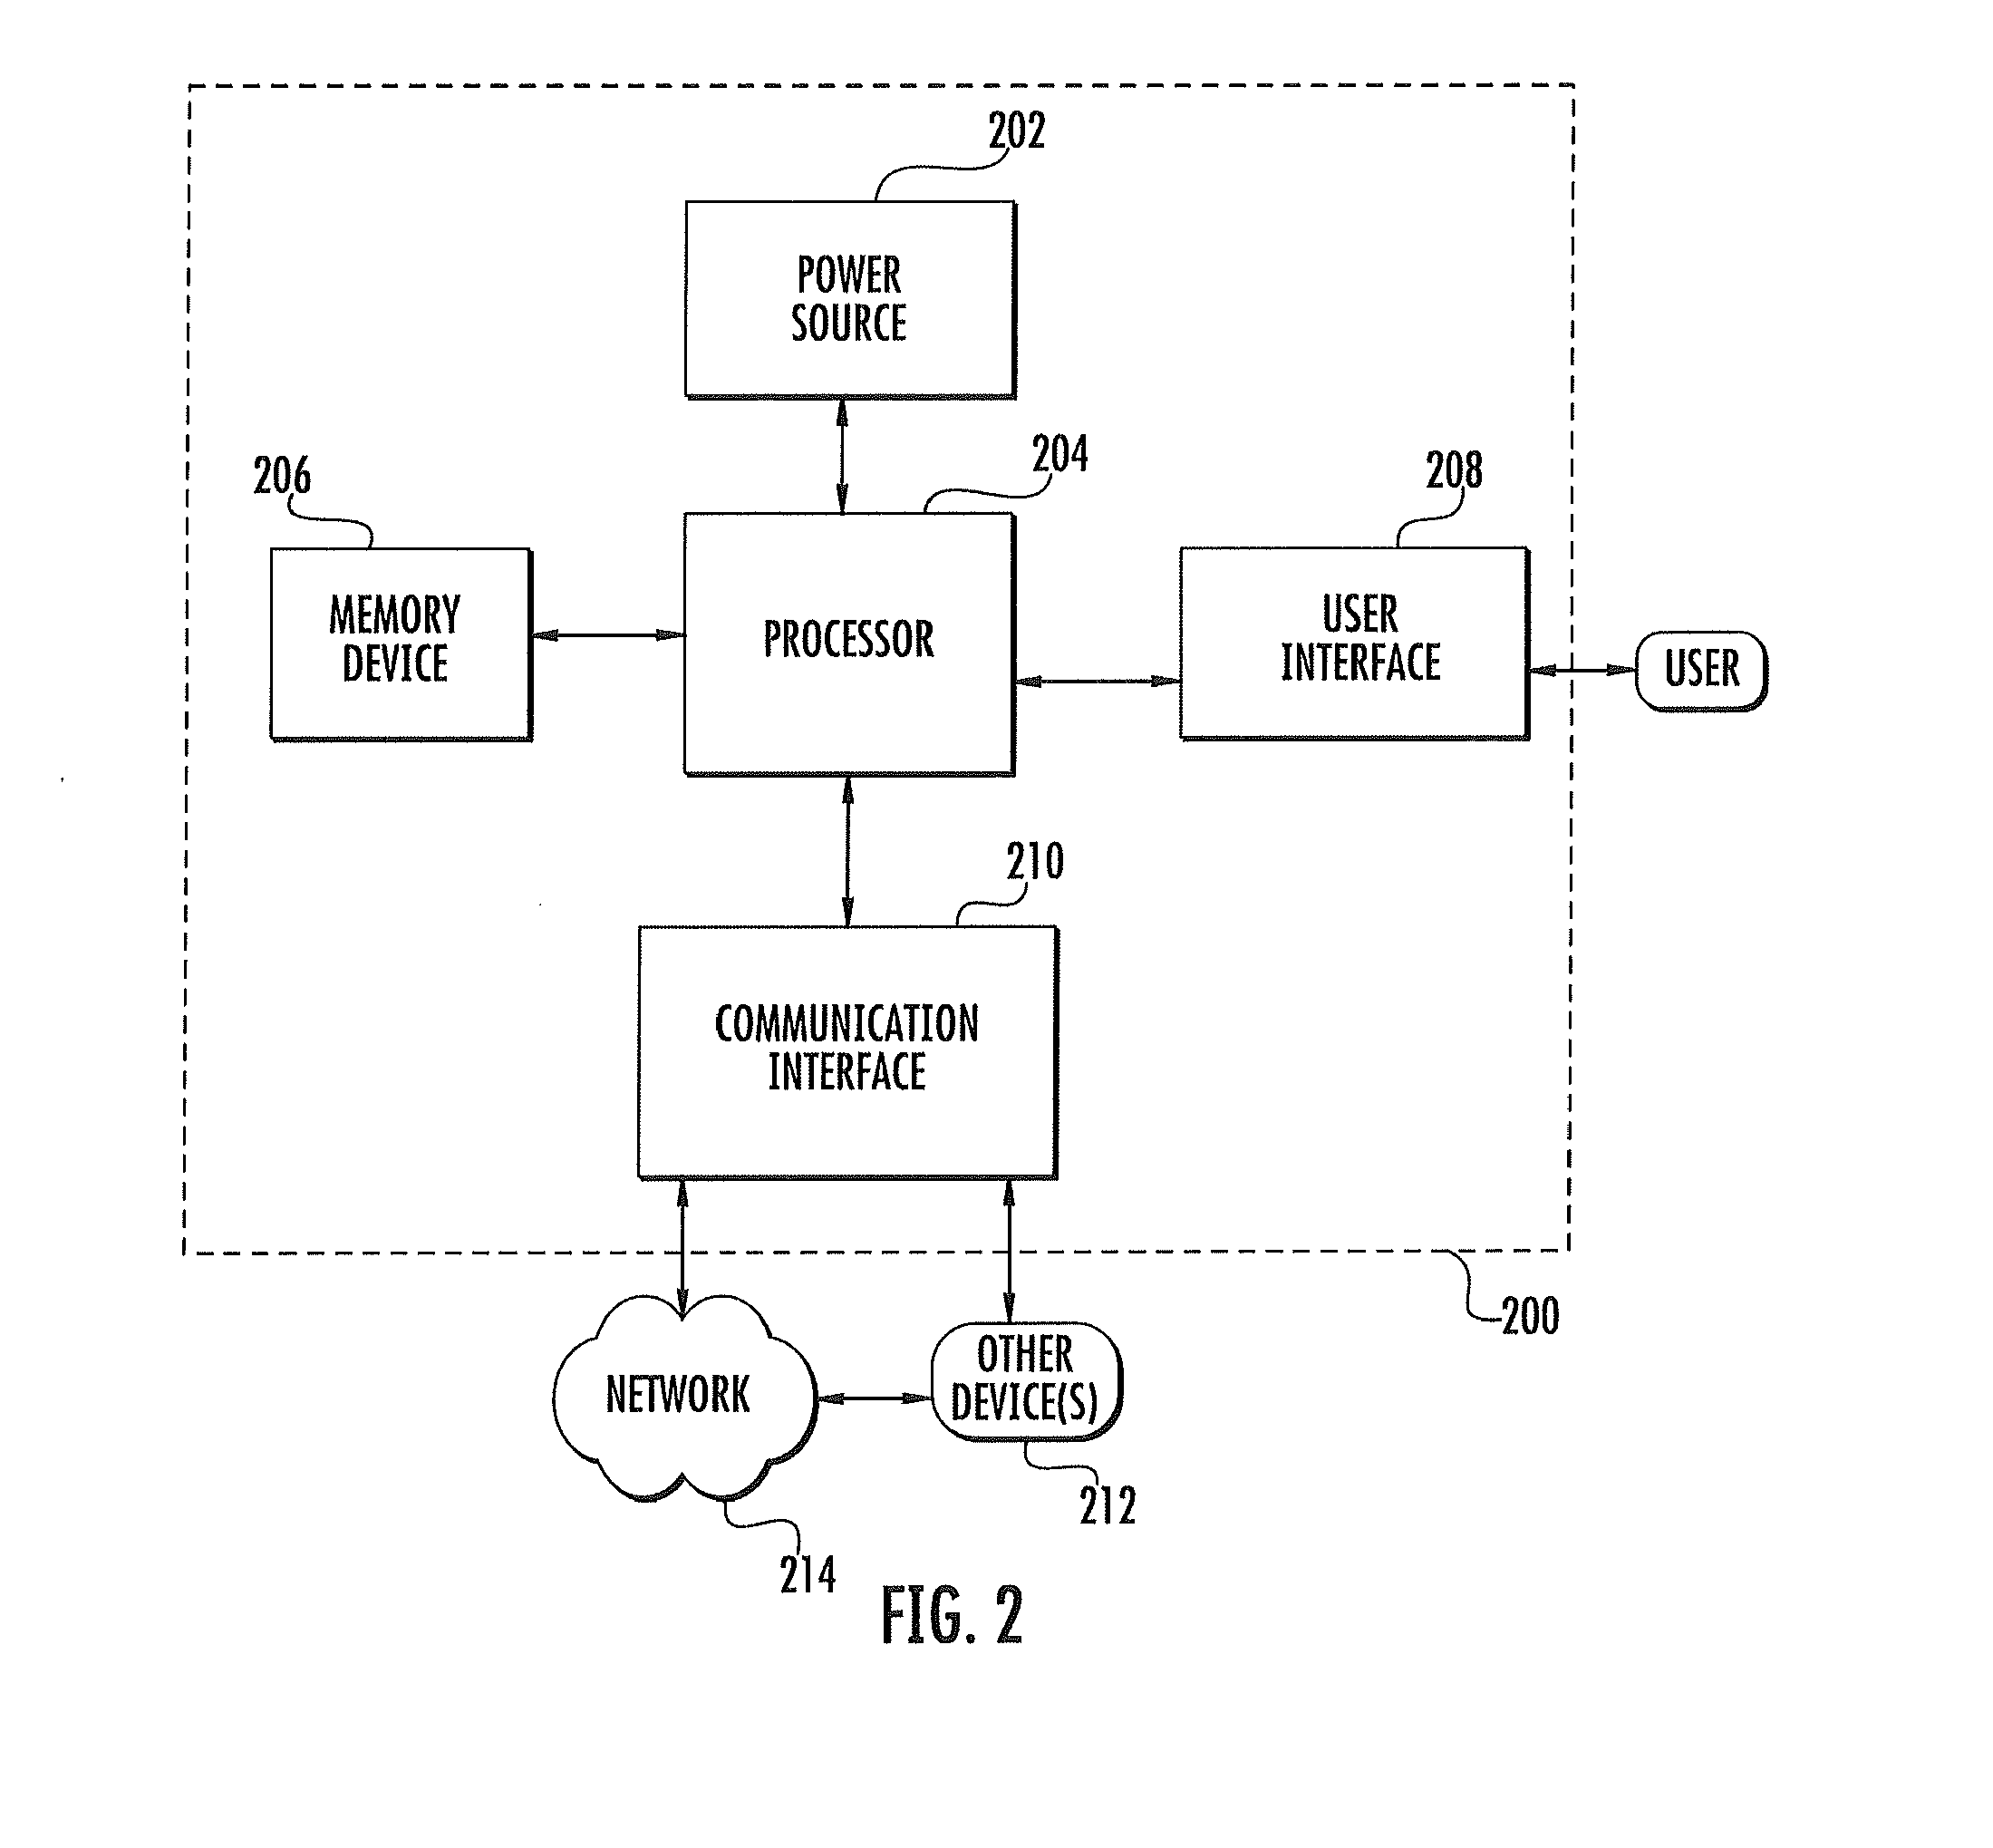 Accessory for an Aerosol Delivery Device and Related Method and Computer Program Product